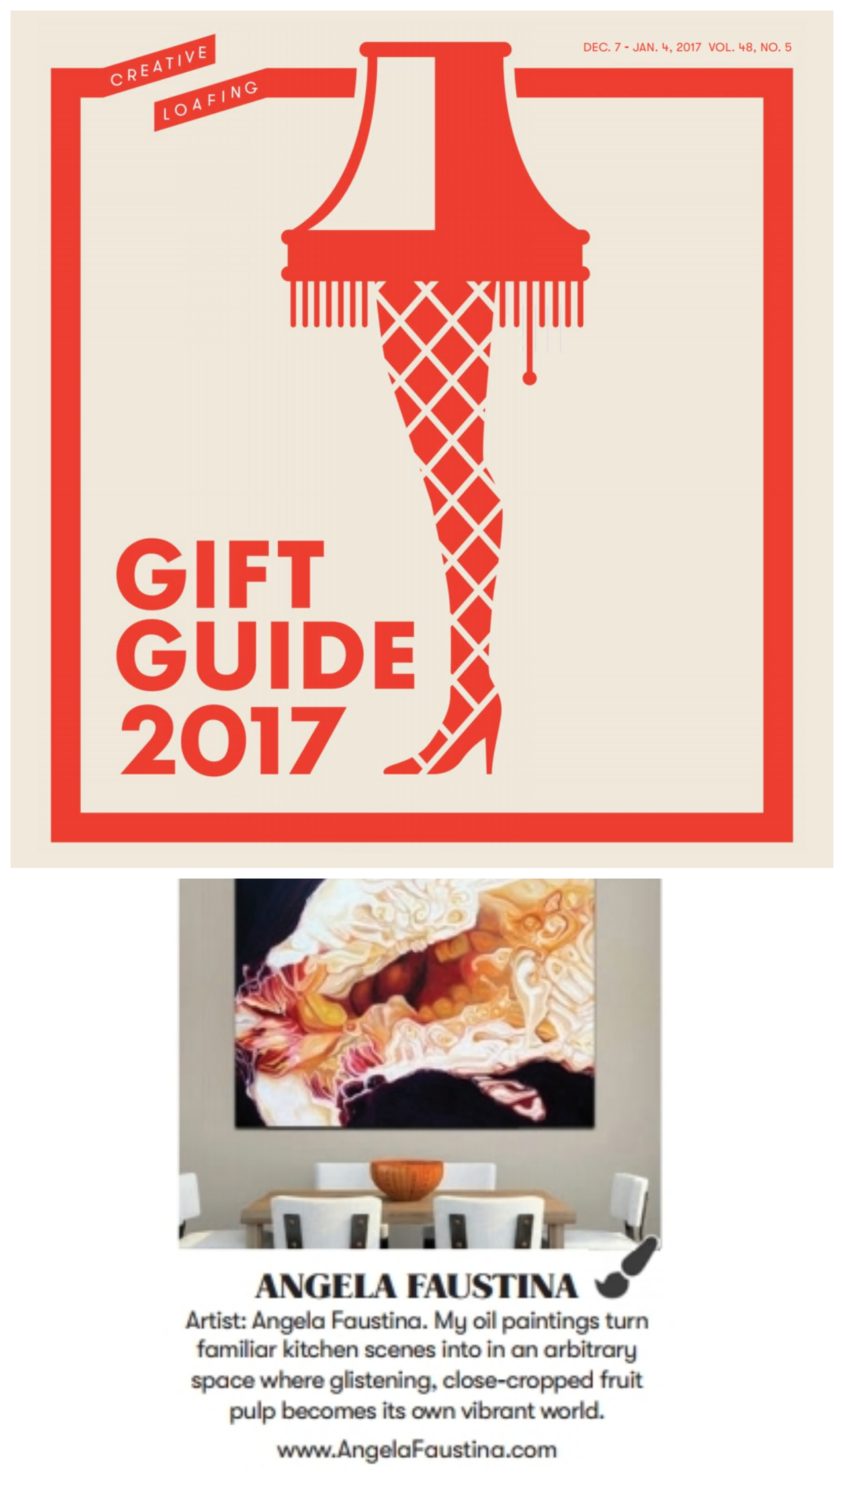 Angela Faustina's oil painting featured in Creative Loafing Atlanta's gift guide